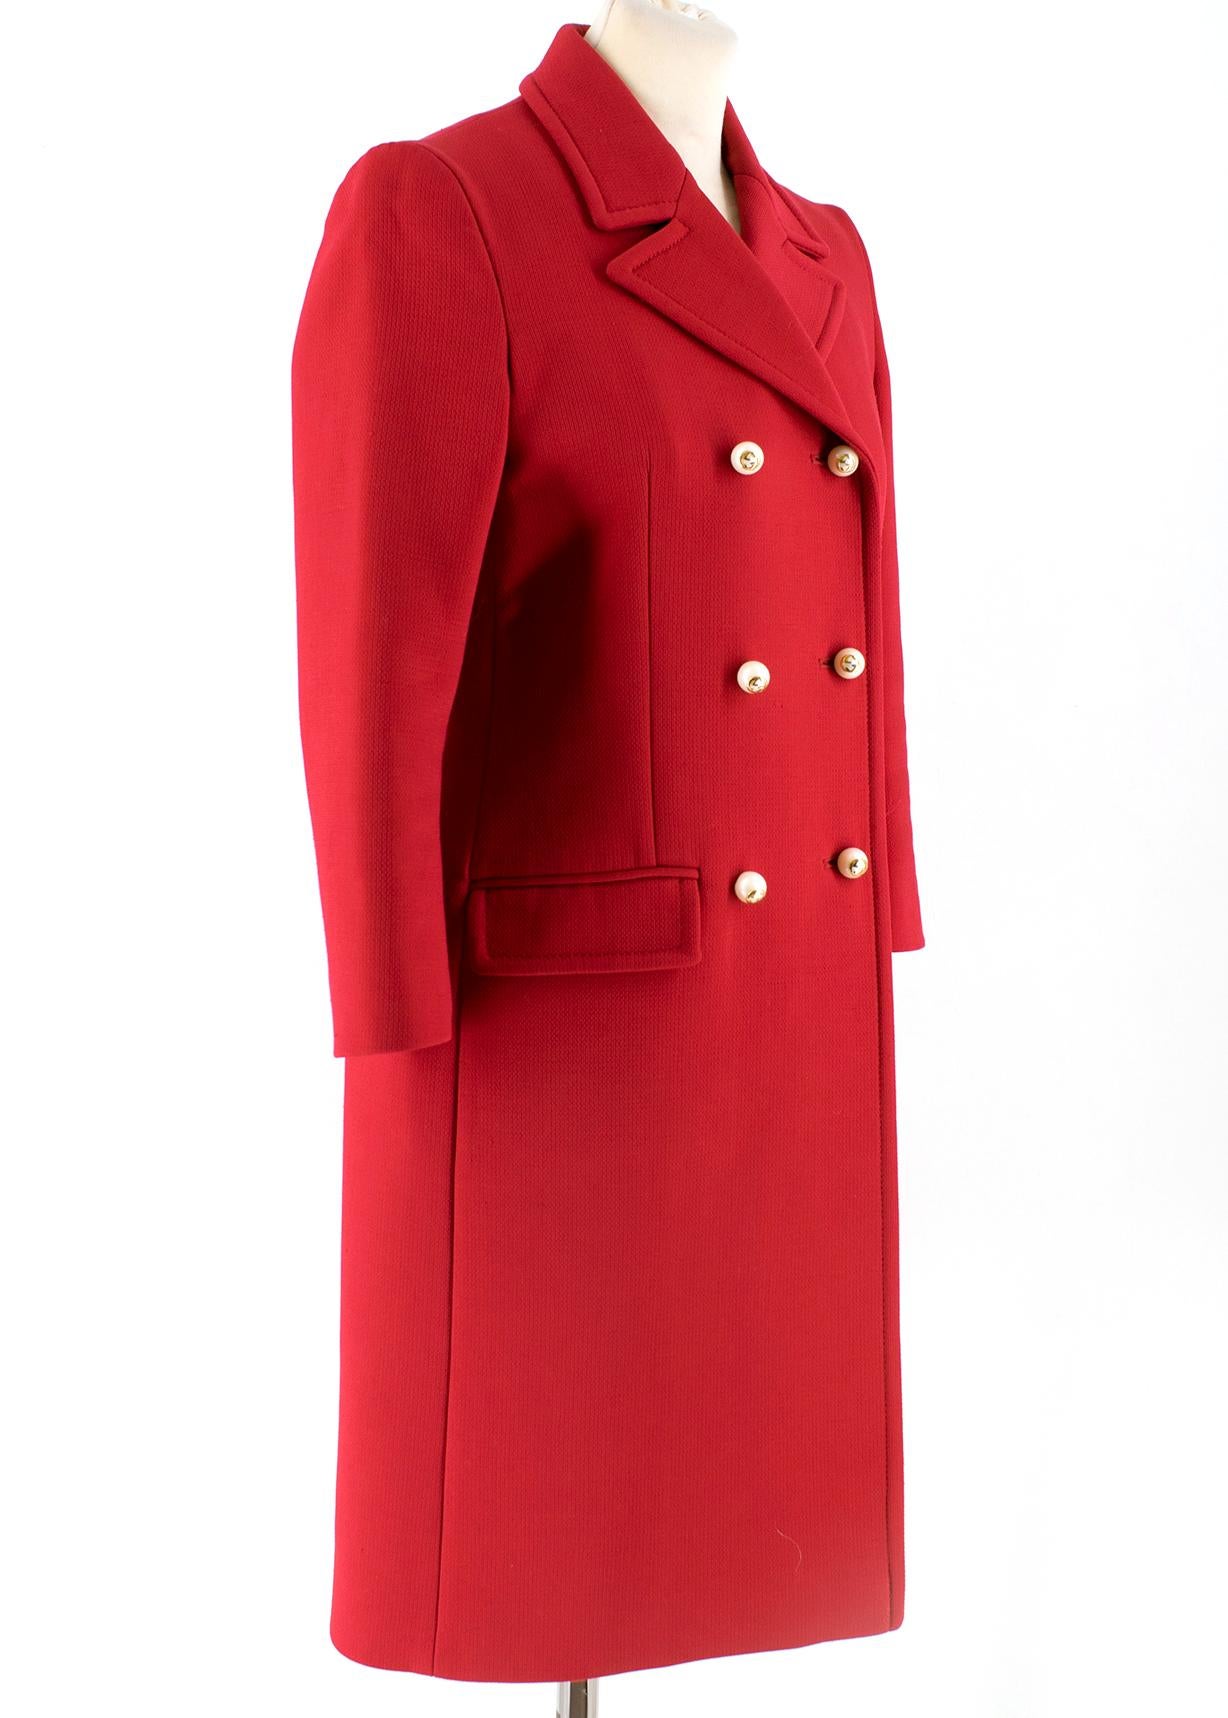 Gucci coat in red wool and polyamide mix. Double-breasted with pearl buttons feature the GG logo in gold.  RRP £2200.00


- 73 % wool, 25% Polyamide, 2% Elastane 
- Lining: 52% Acetate, 48% Viscose 
- Front patch pockets with flaps
- Made in